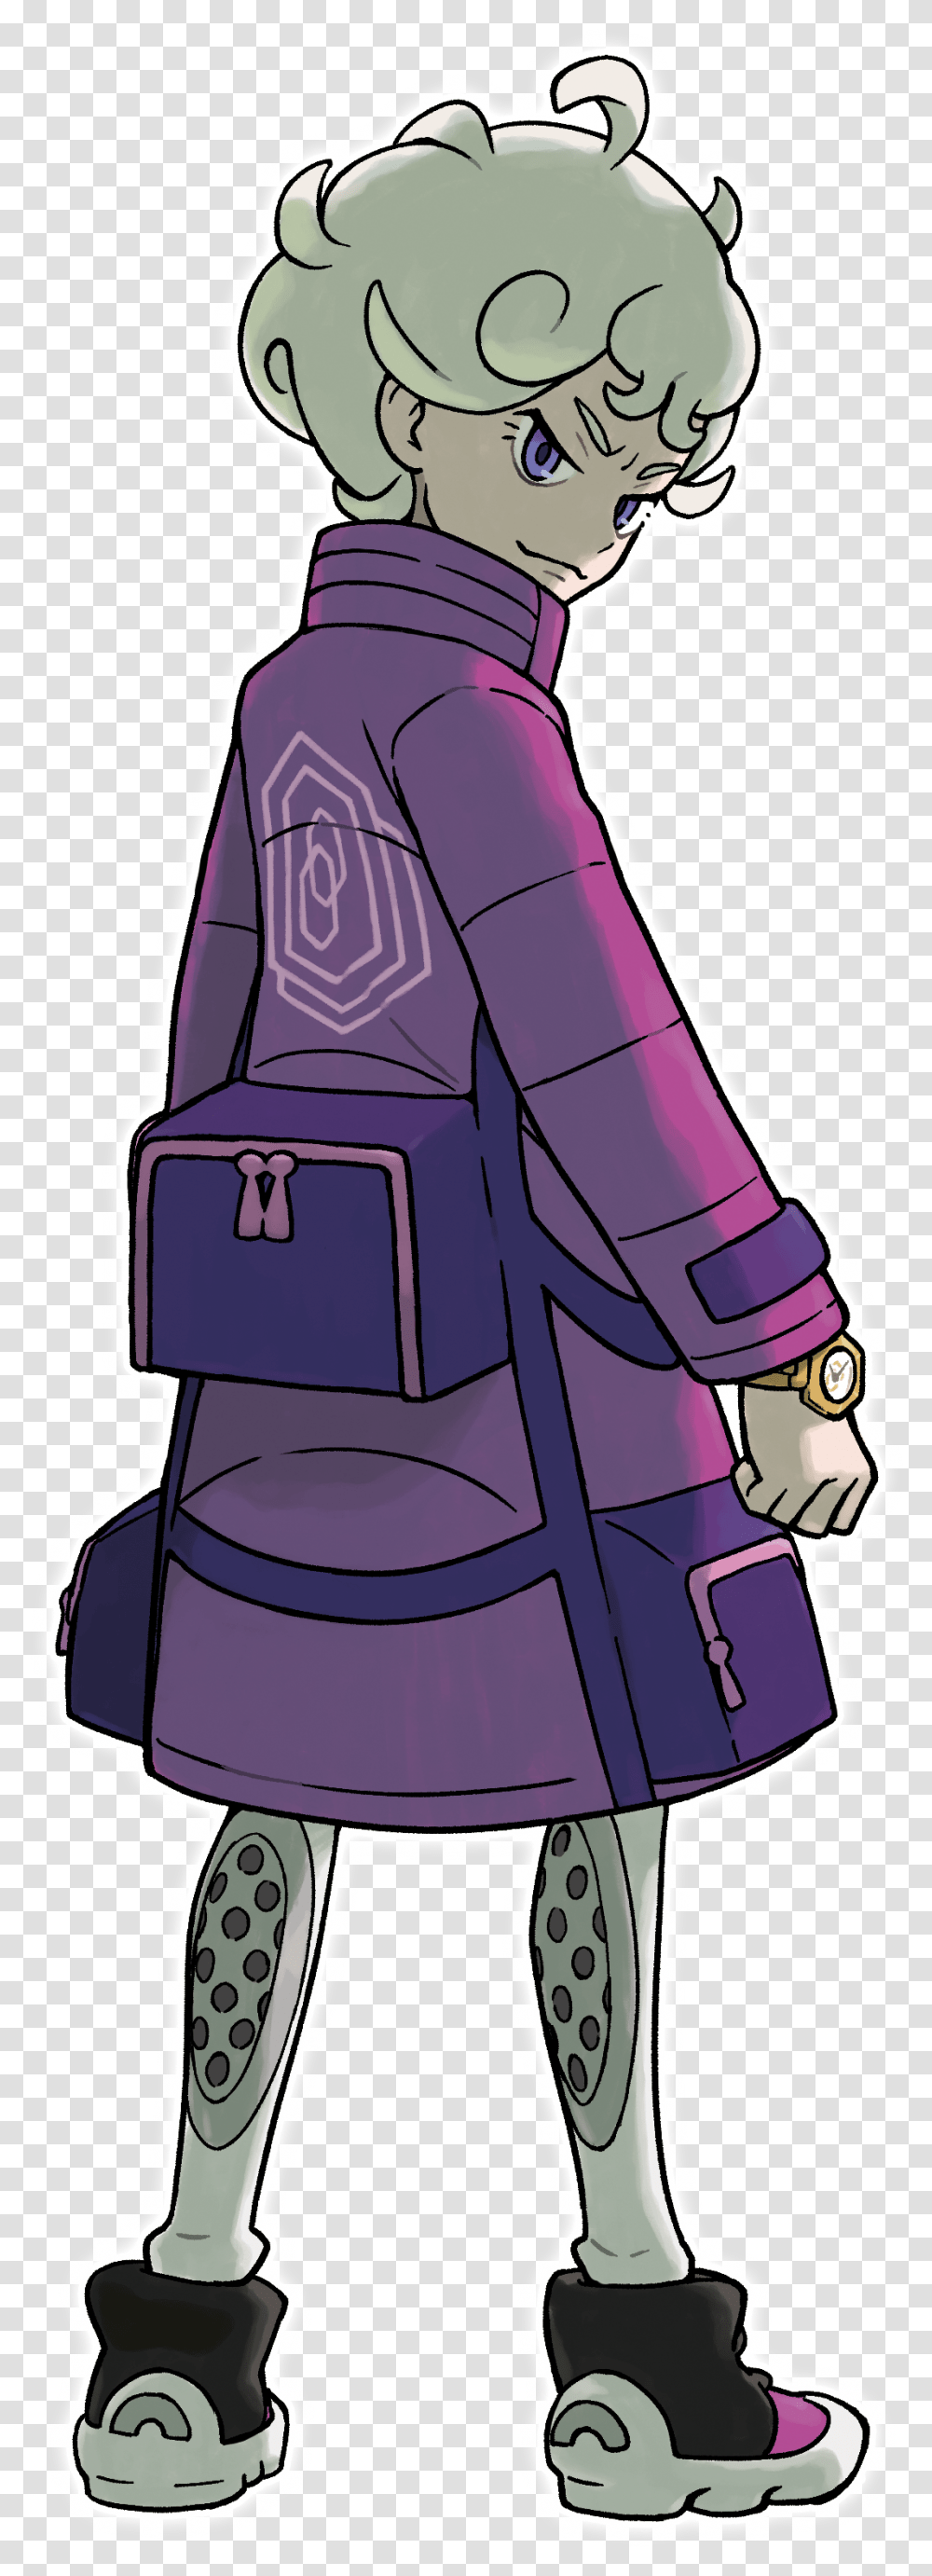 Bede Pokemon Sword And Shield Bede, Person, Clothing, Hug, Costume Transparent Png